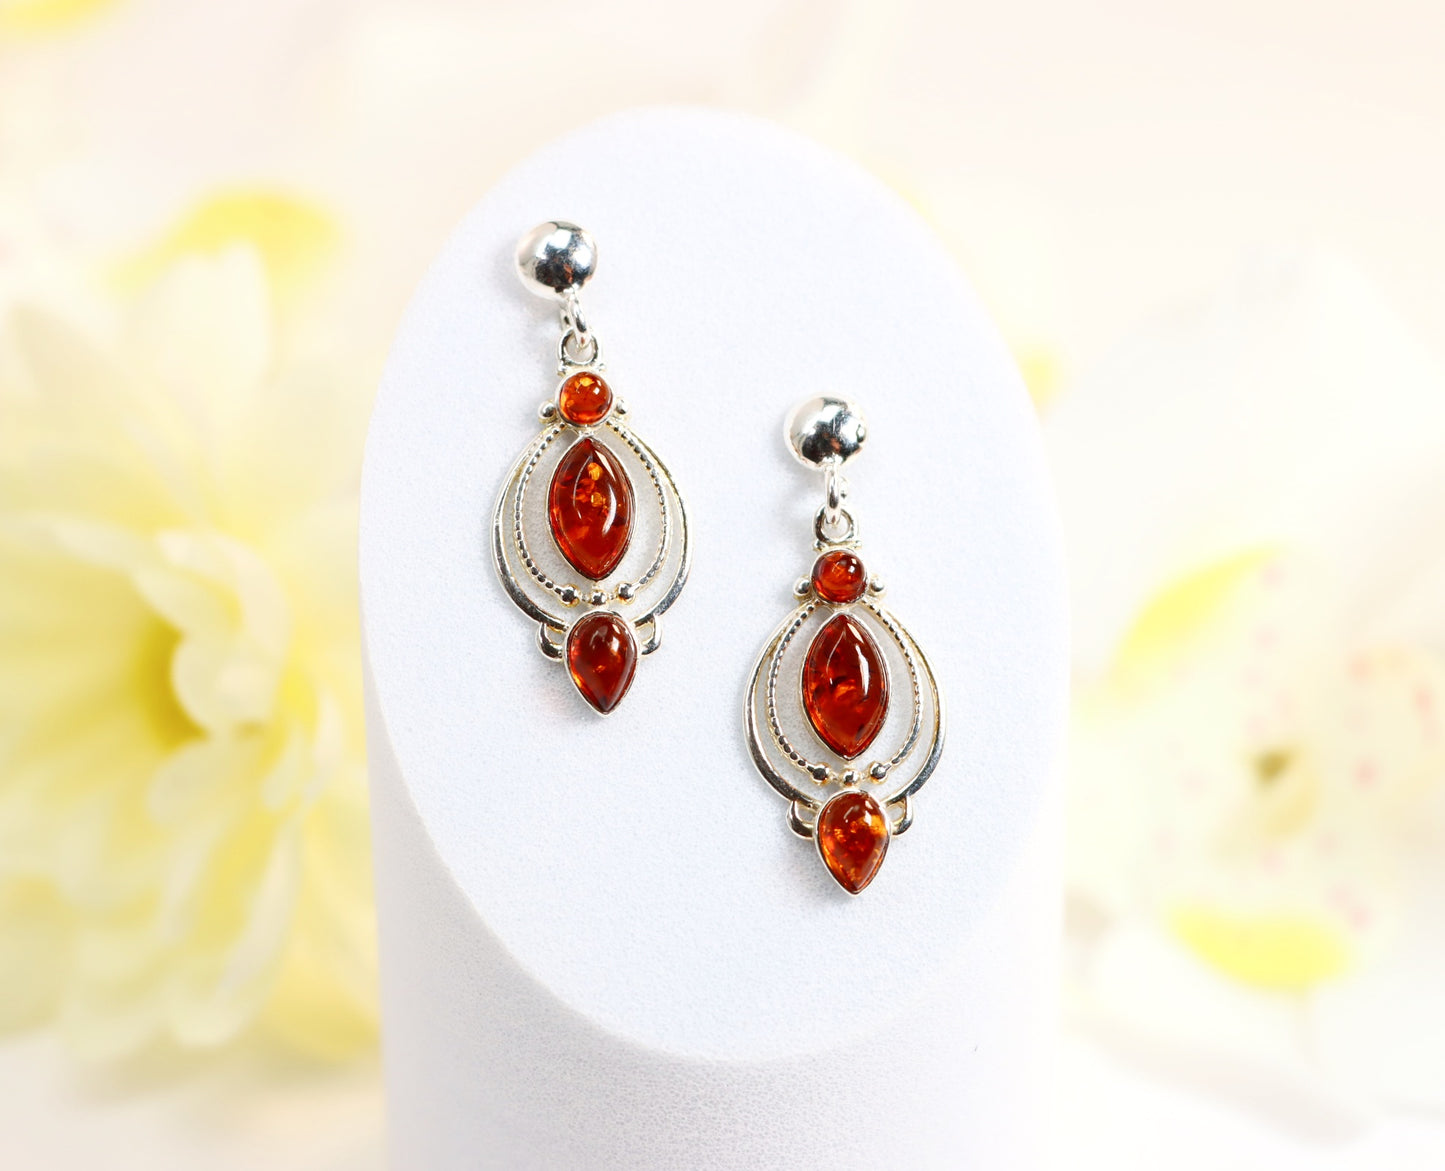 Natural Baltic Cognac Amber Victorian Dangle Earrings in 925 Sterling Silver